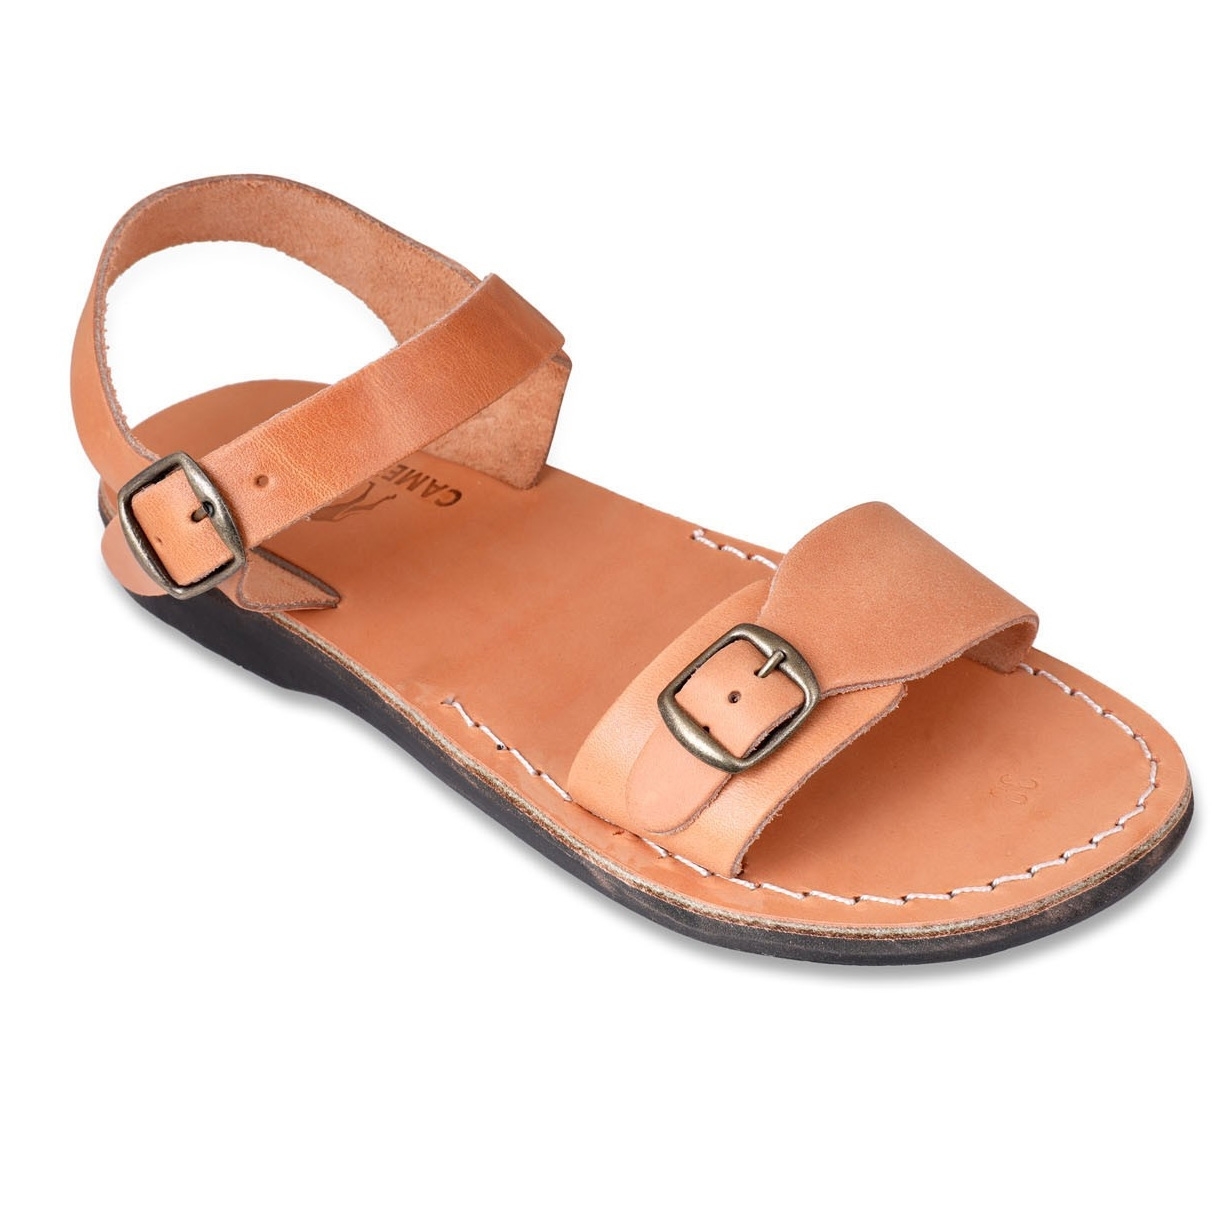 Canaan Handmade Leather Sandals (Choice of Colors) - 1